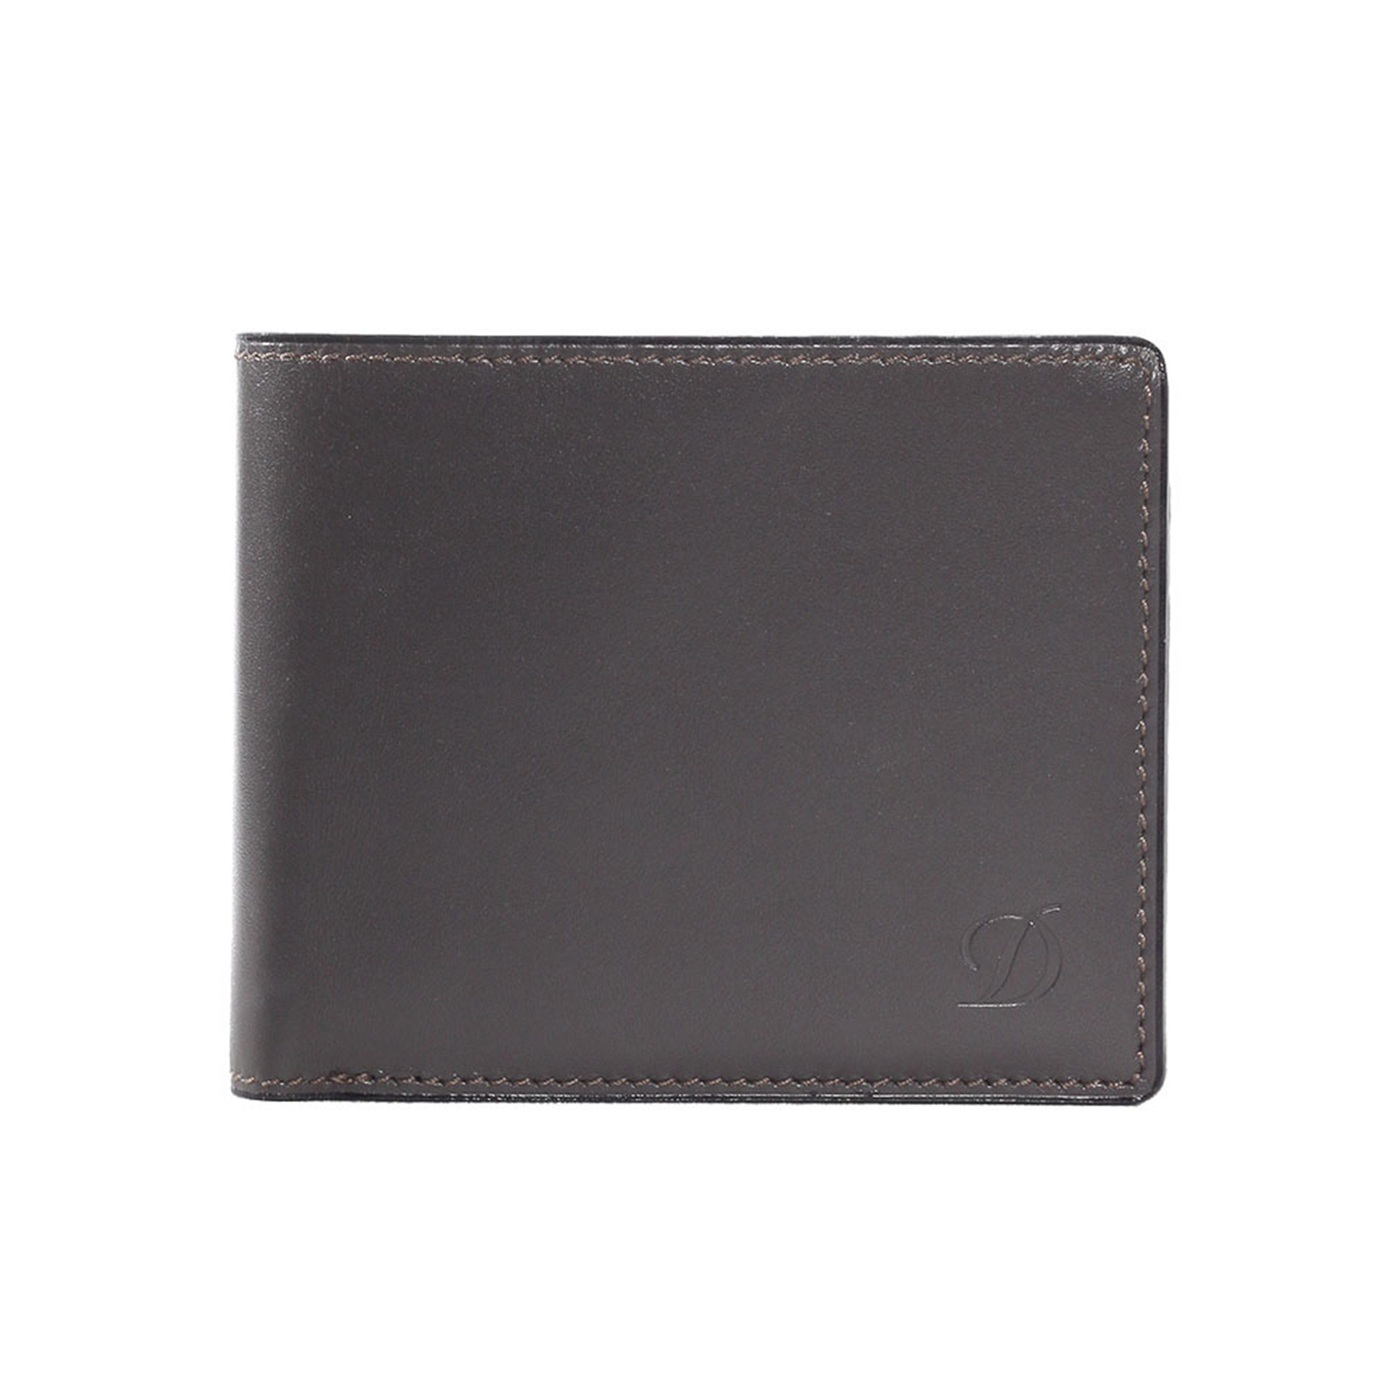 Shop The Latest Collection Of Outlet - S.T. Dupont Billfold Wallet - 097105 In Lebanon